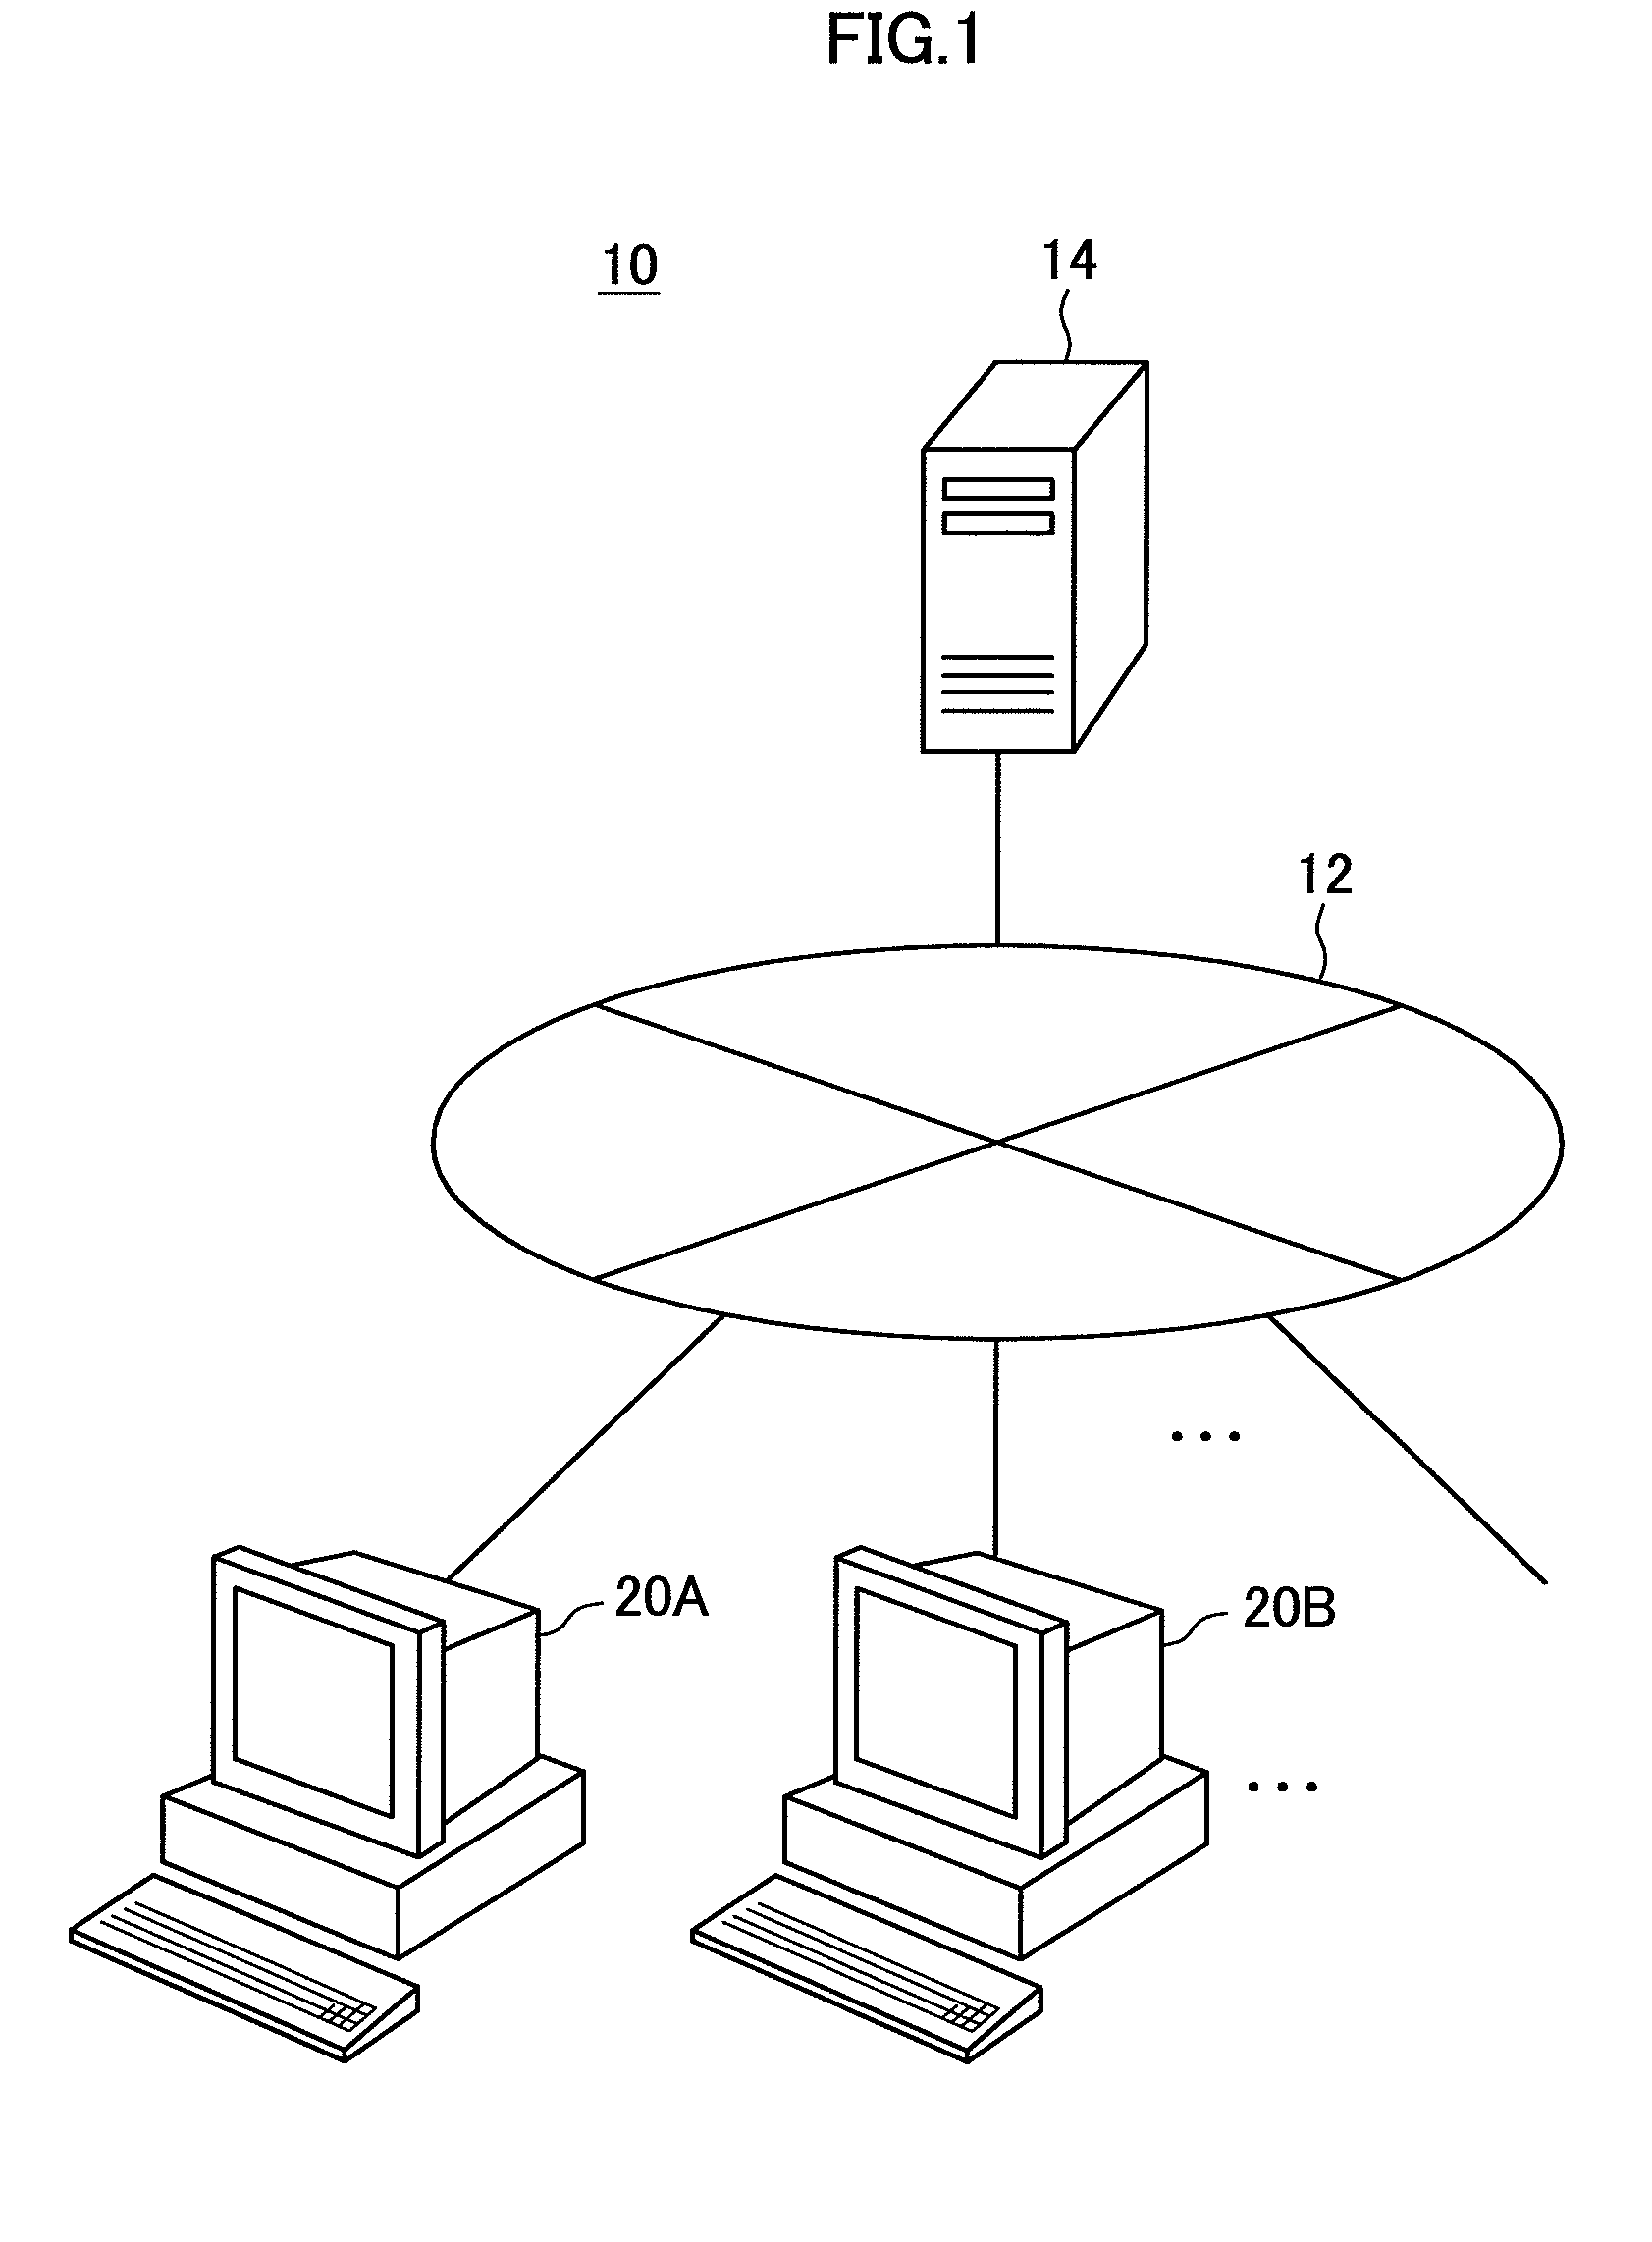 Voice chat system, information processing apparatus, speech recognition method, keyword data electrode detection method, and program for speech recognition